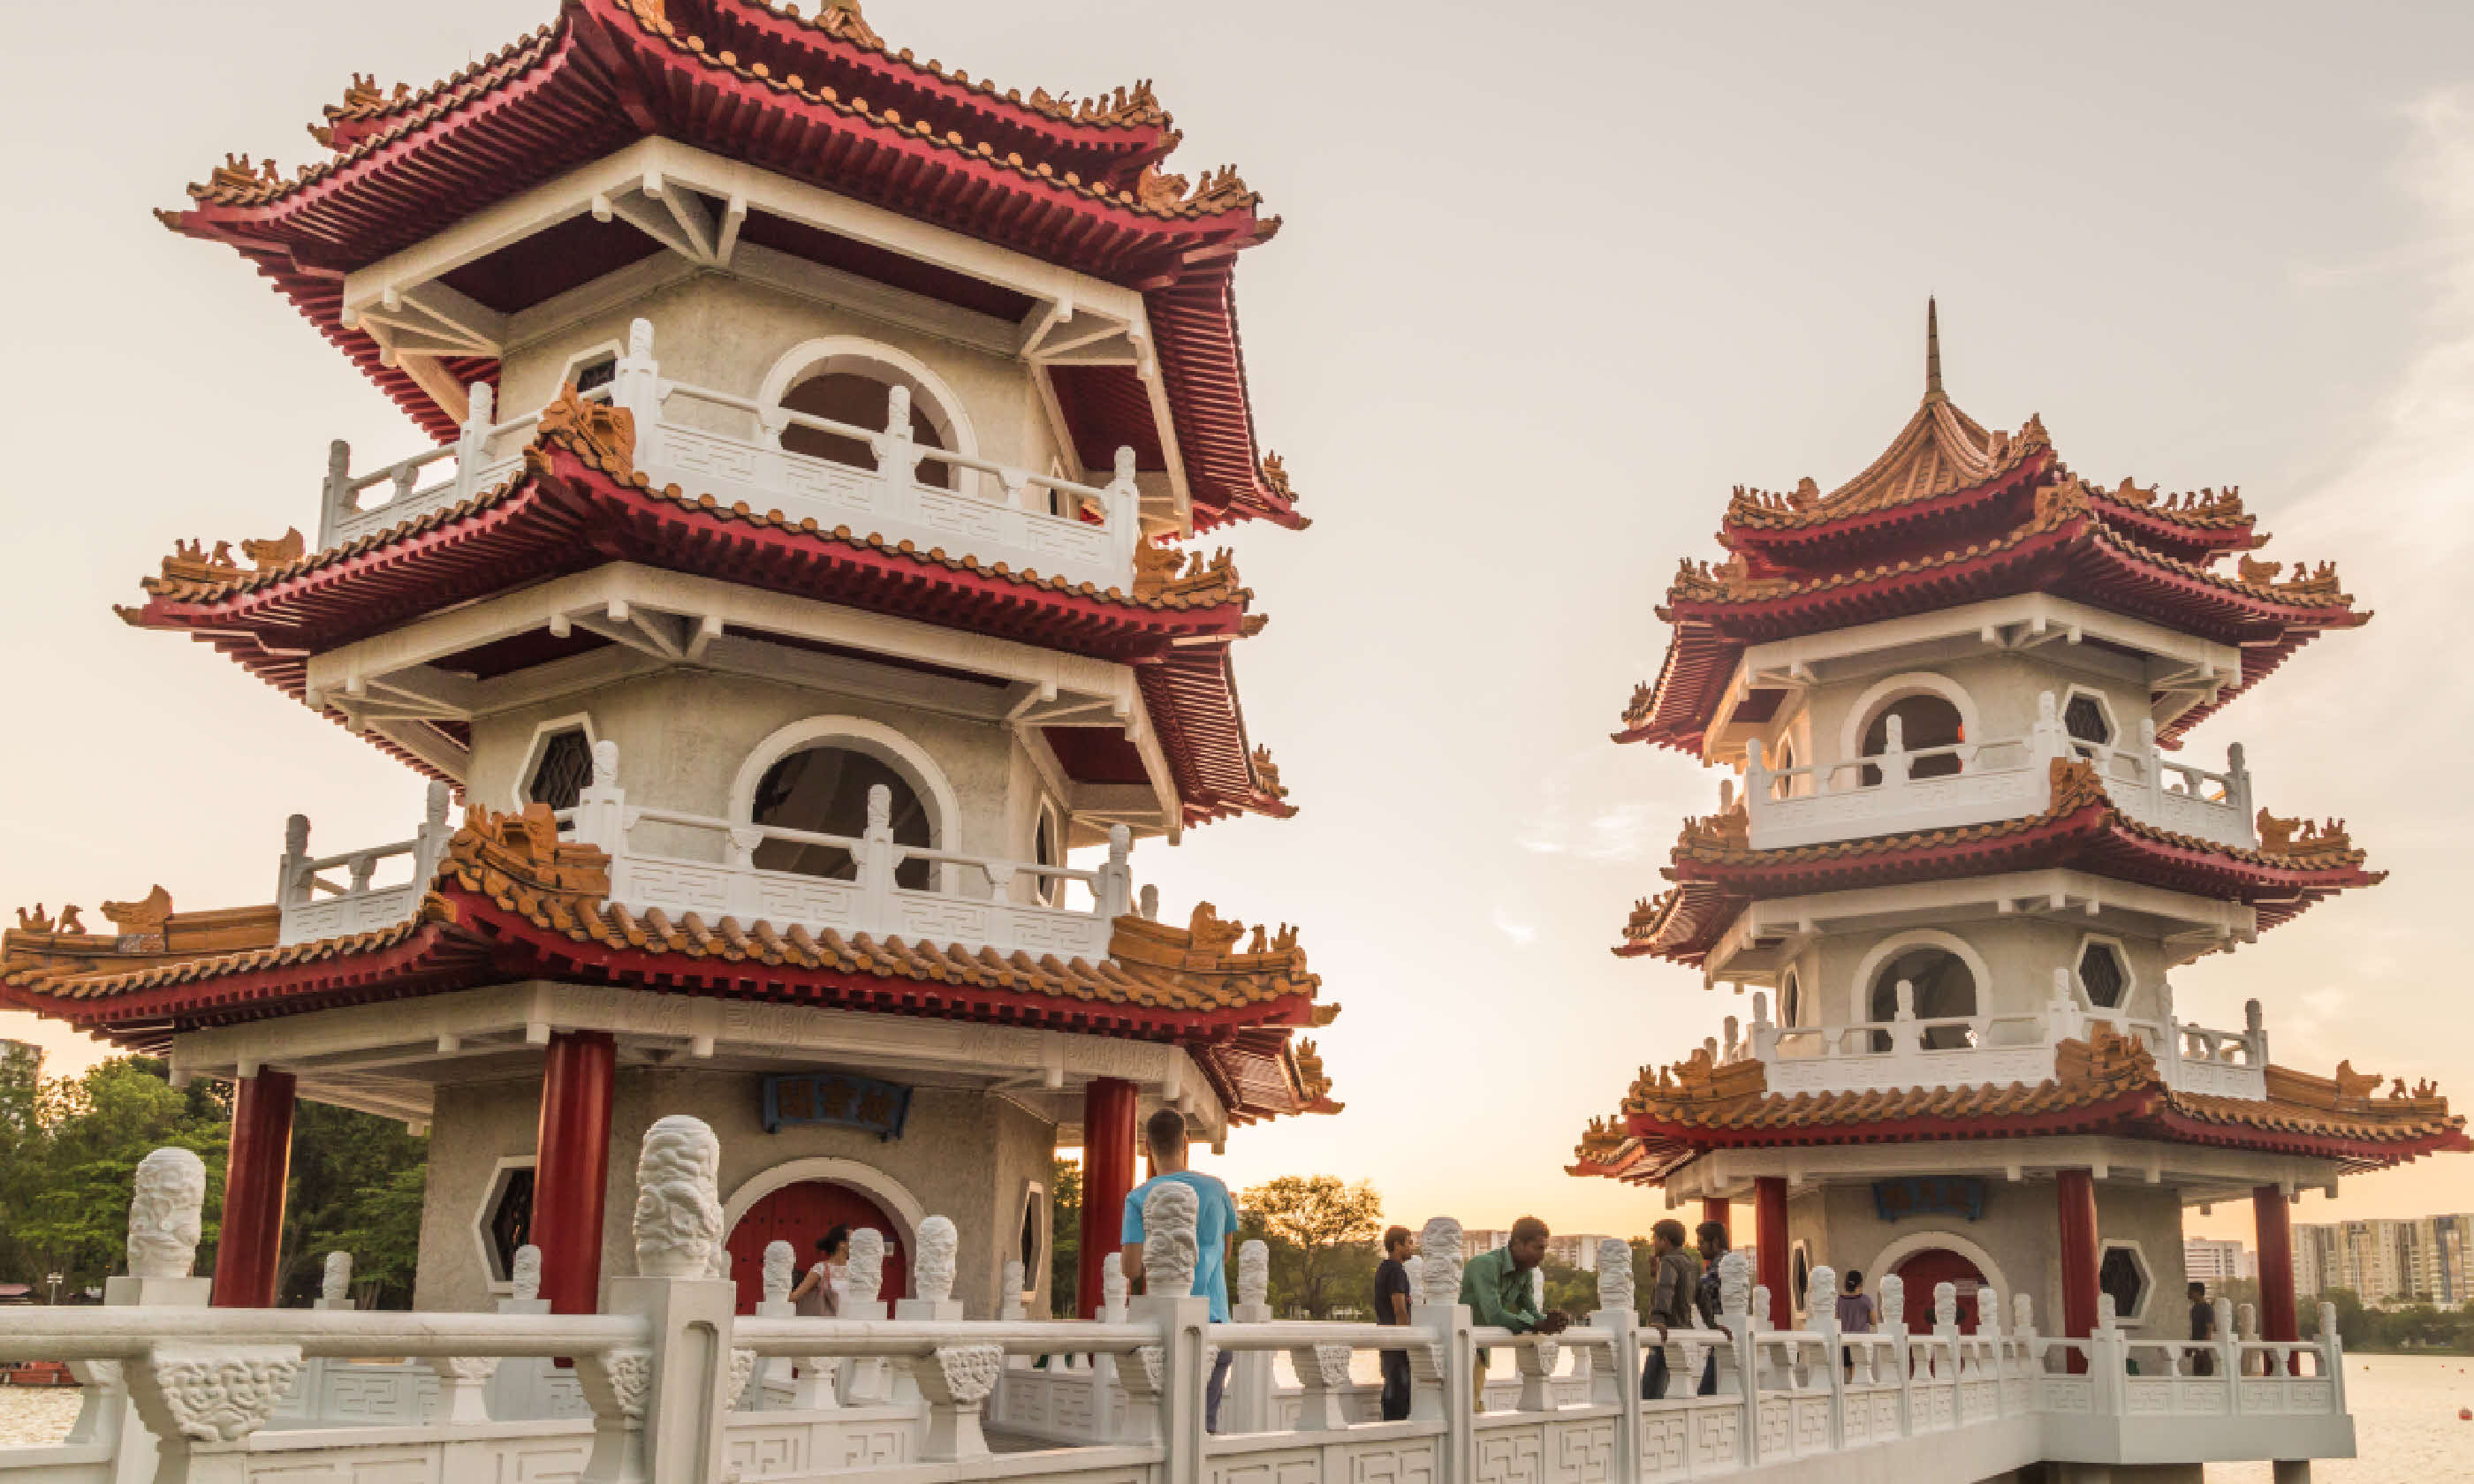 Twin pagodas at the Singapore Chinese Gardens (Shutterstock: see credit below)